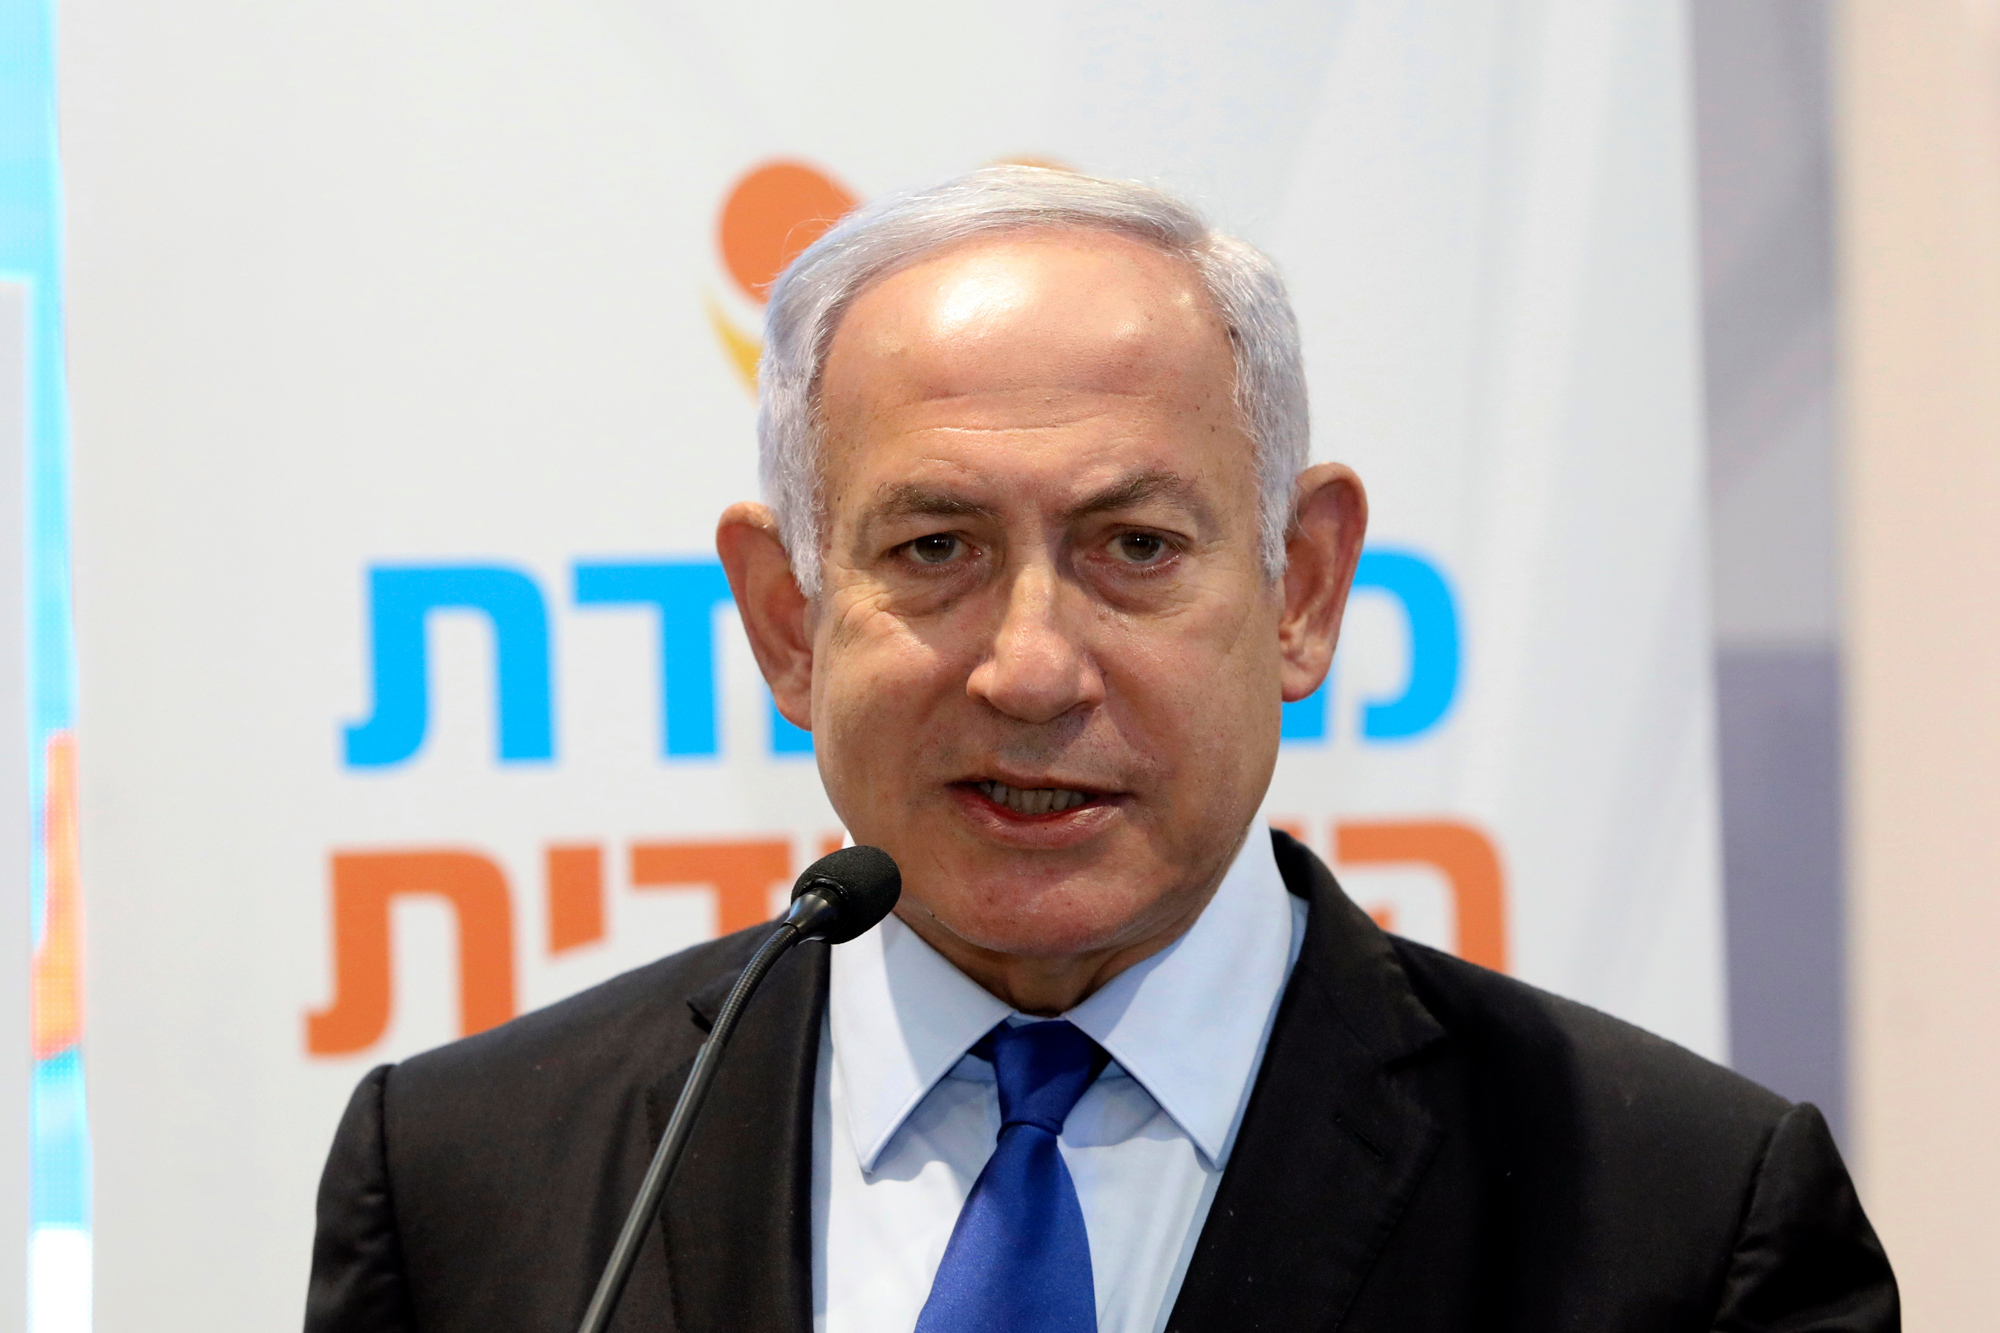 17 Every Israeli Citizen Over Age 16 Will Be Vaccinated By The End Of March Says Pm